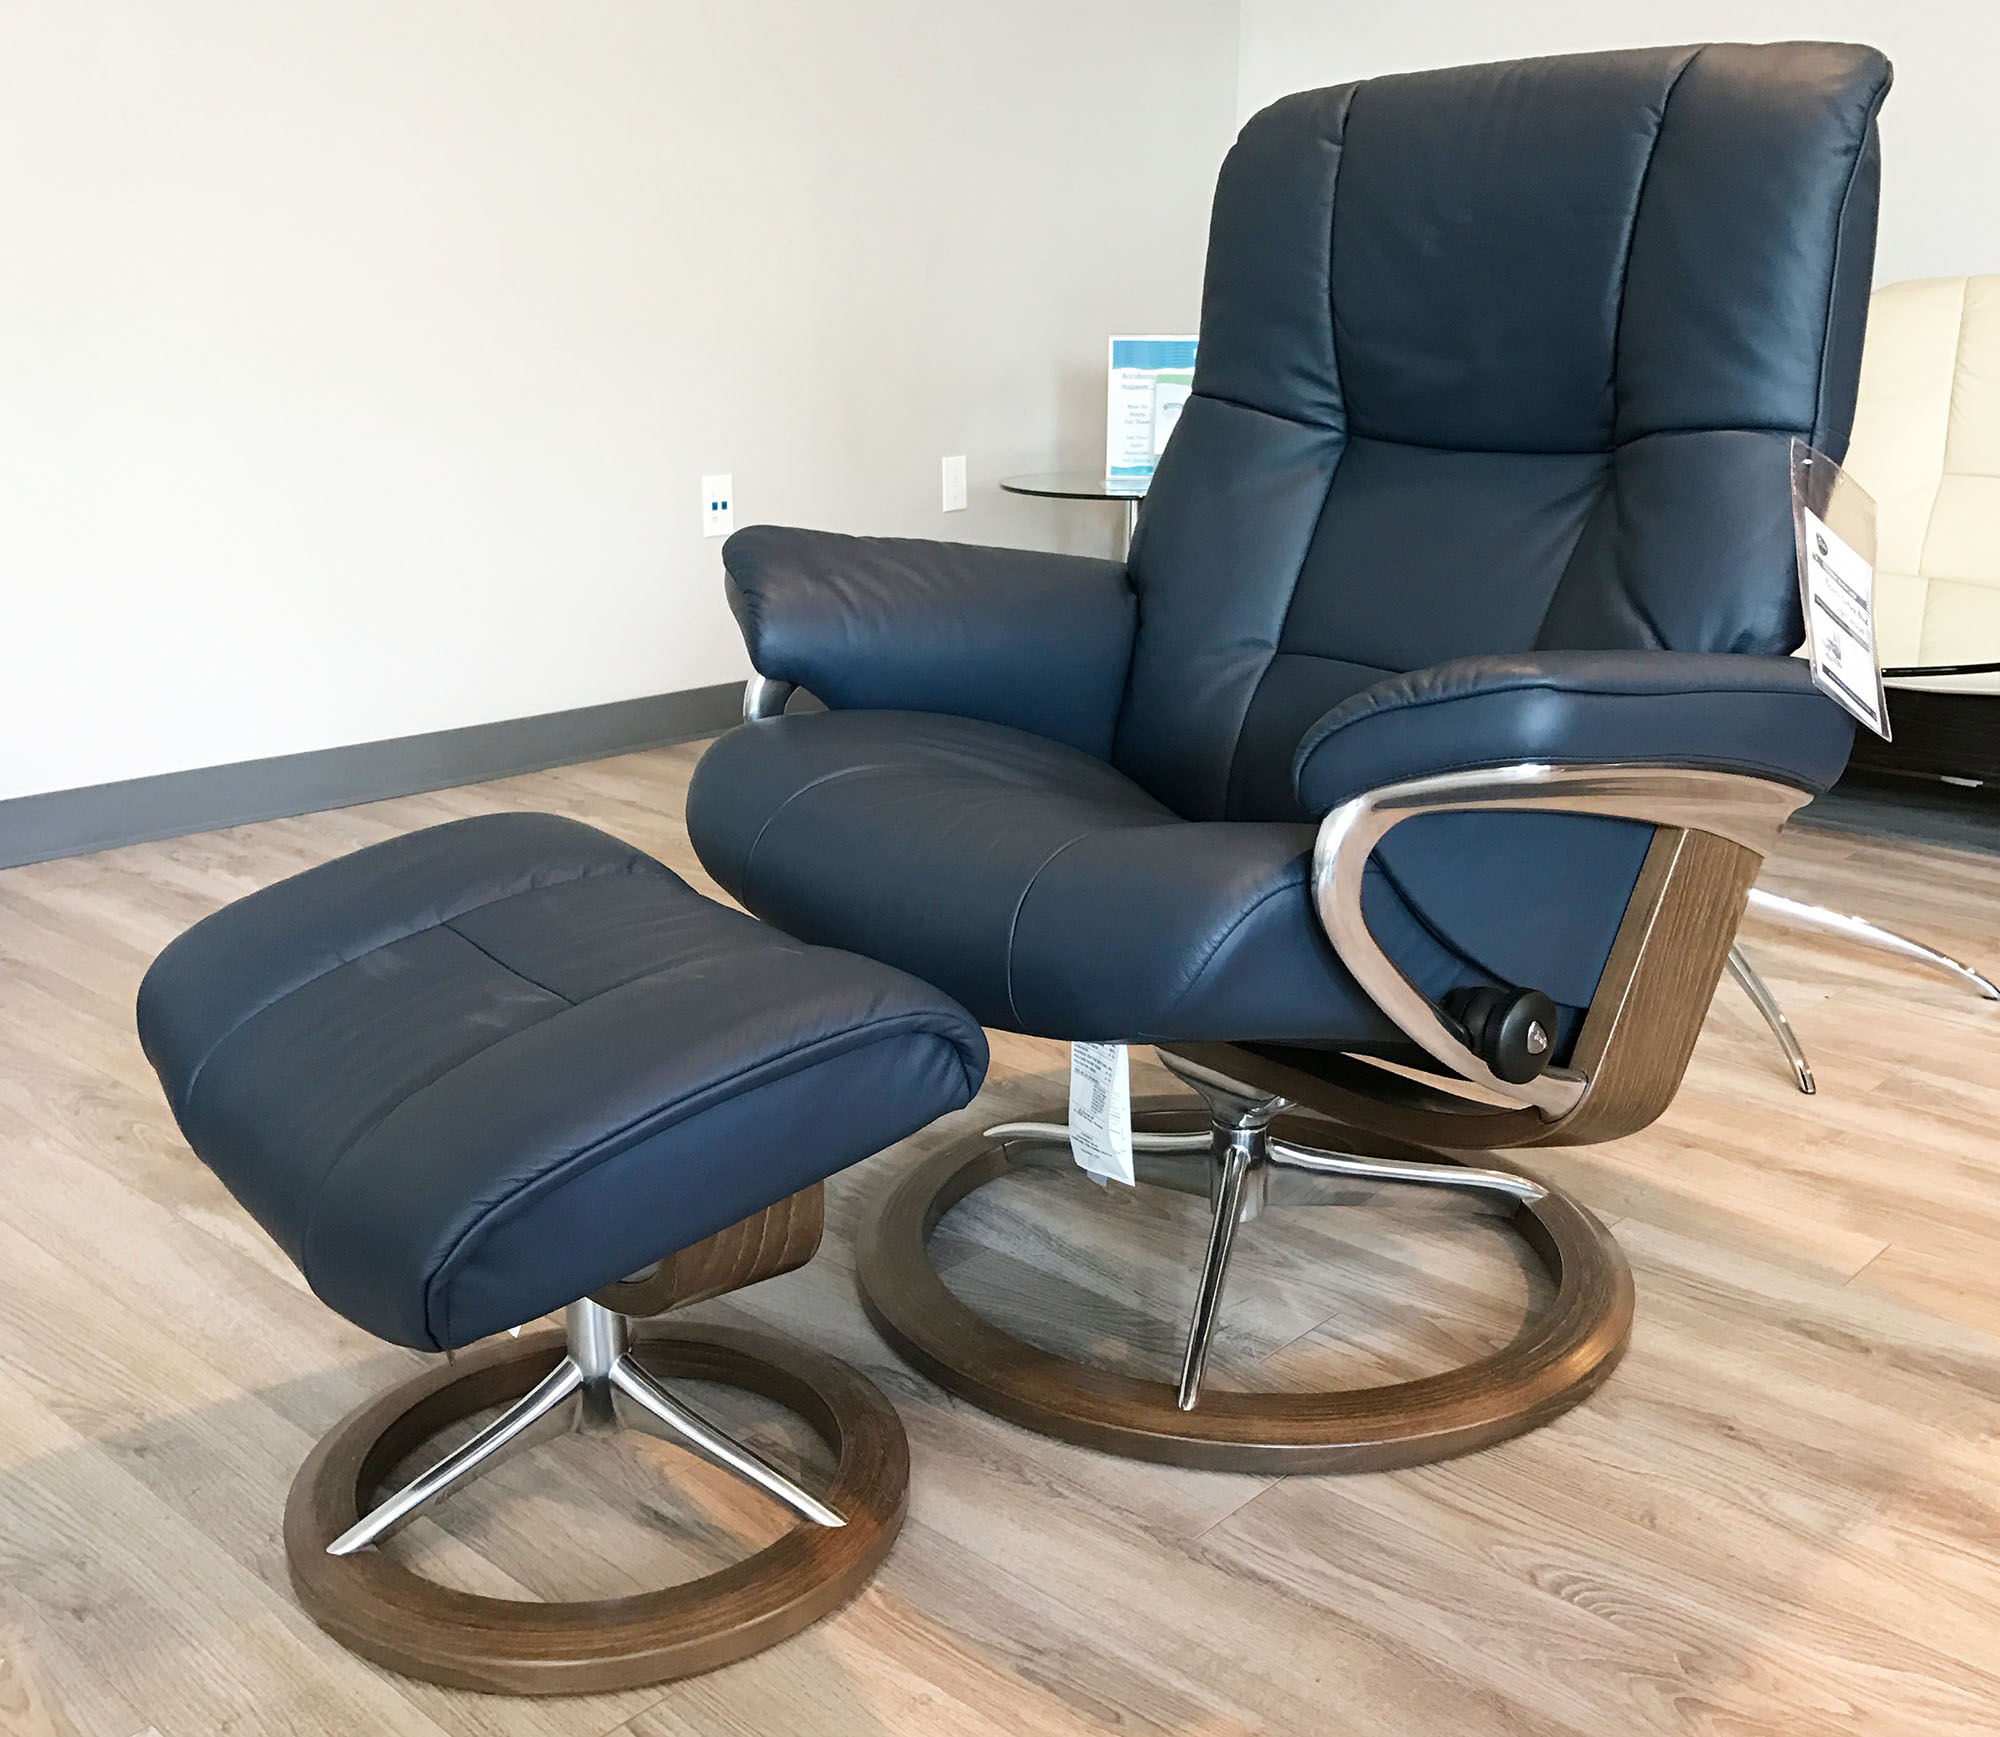 Stressless Mayfair Signature Walnut Wood Paloma Oxford Blue Leather  Recliner Chair and Ottoman by Ekornes